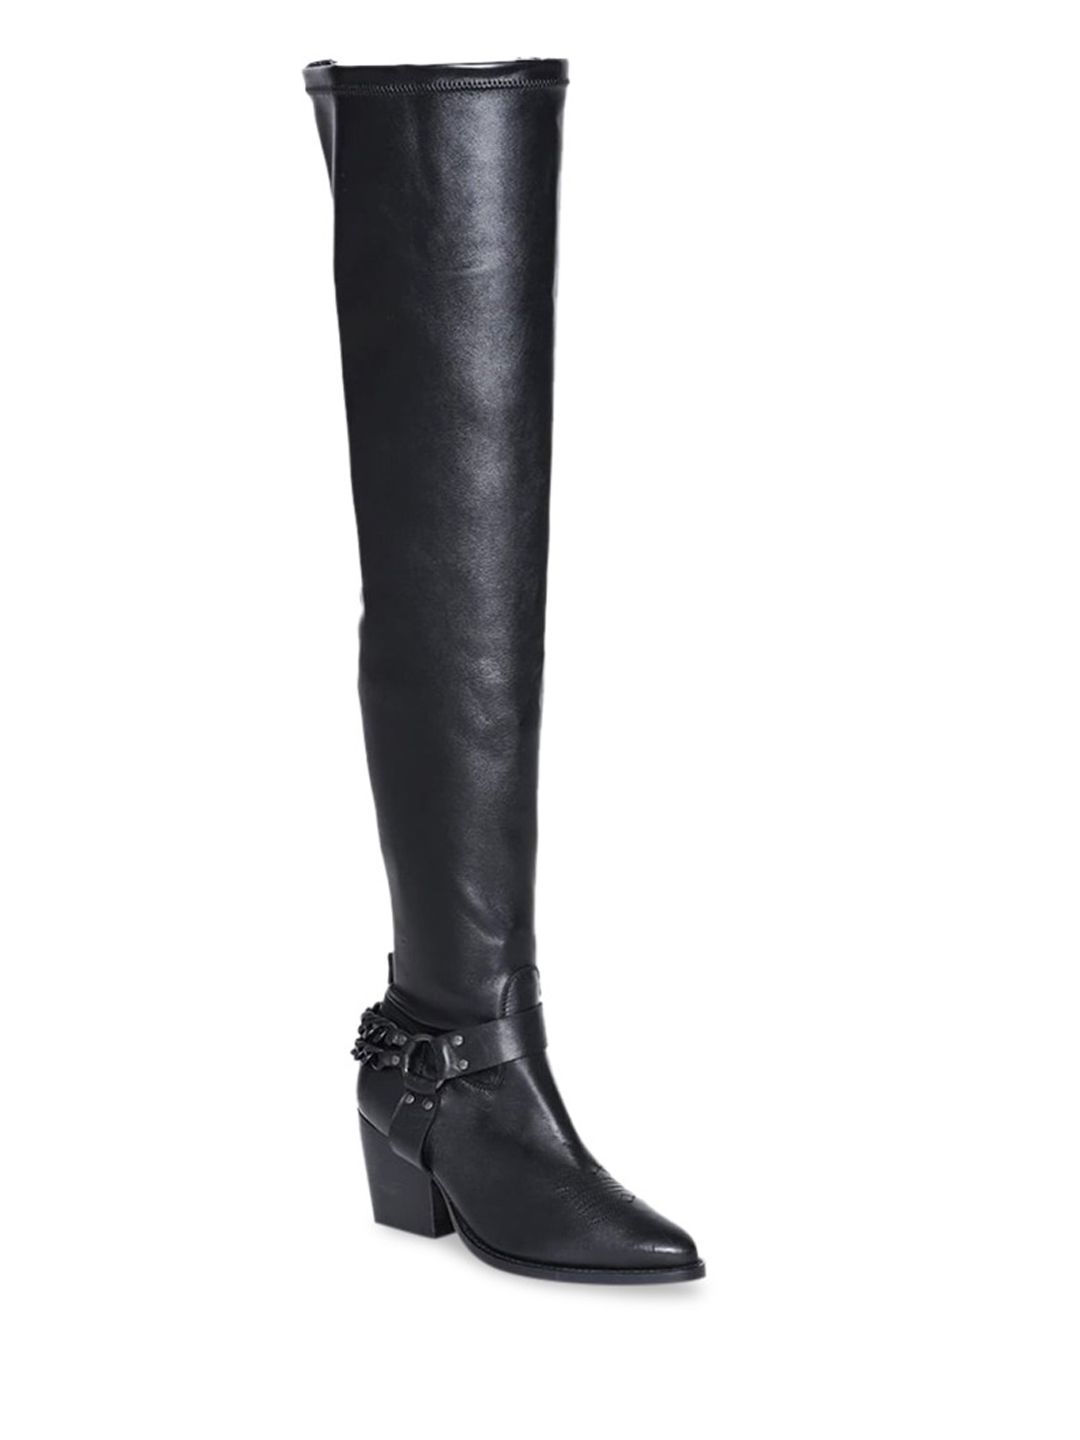 Saint G Women Black Above The Knee Boots Price in India